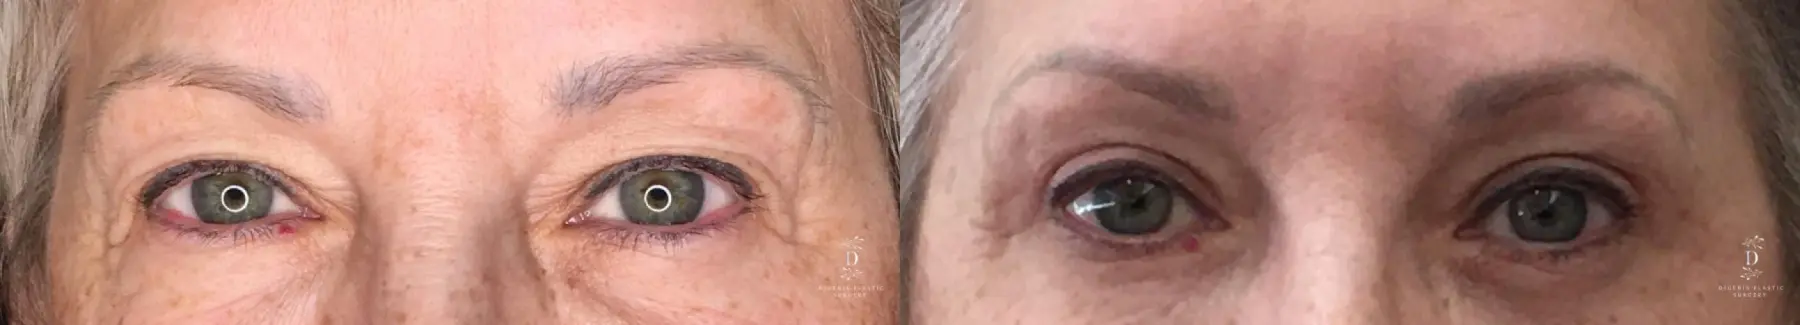 Eyelid Surgery: Patient 29 - Before and After 1